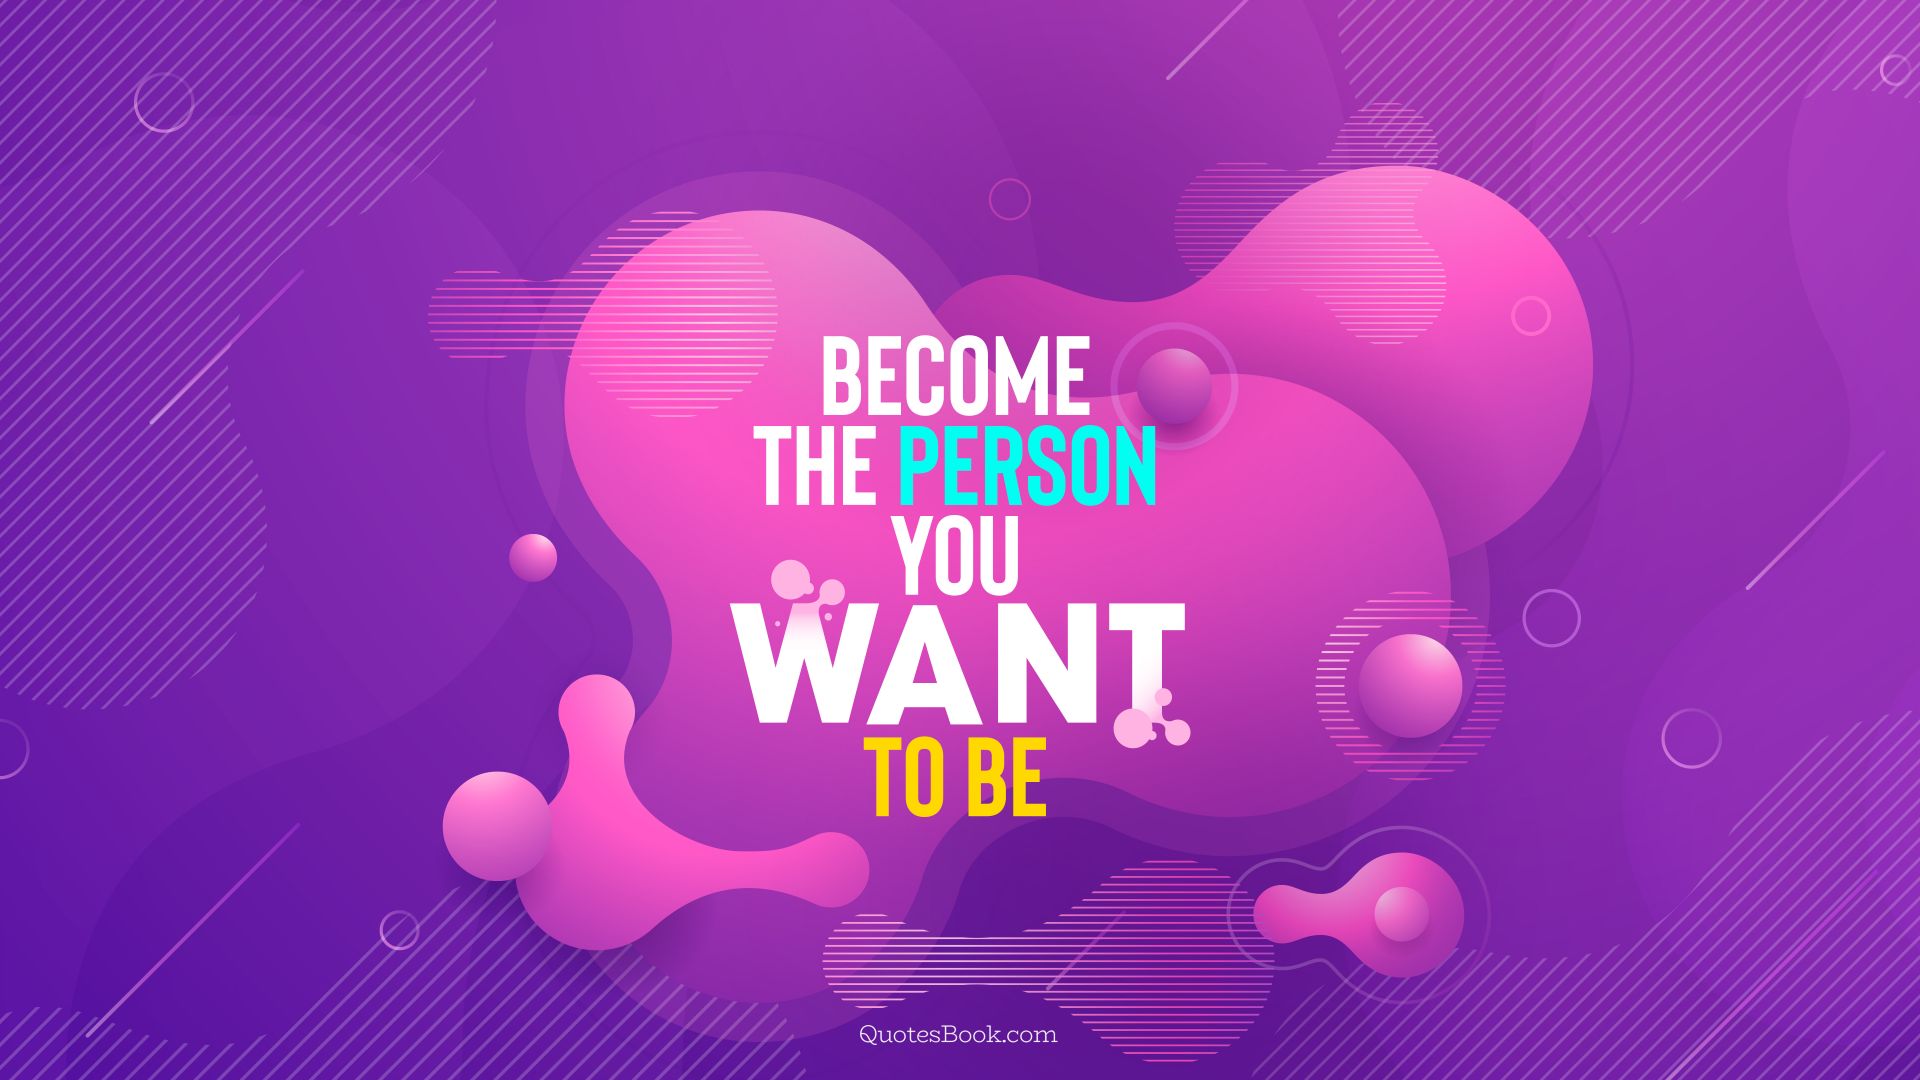 Become the person you want to be